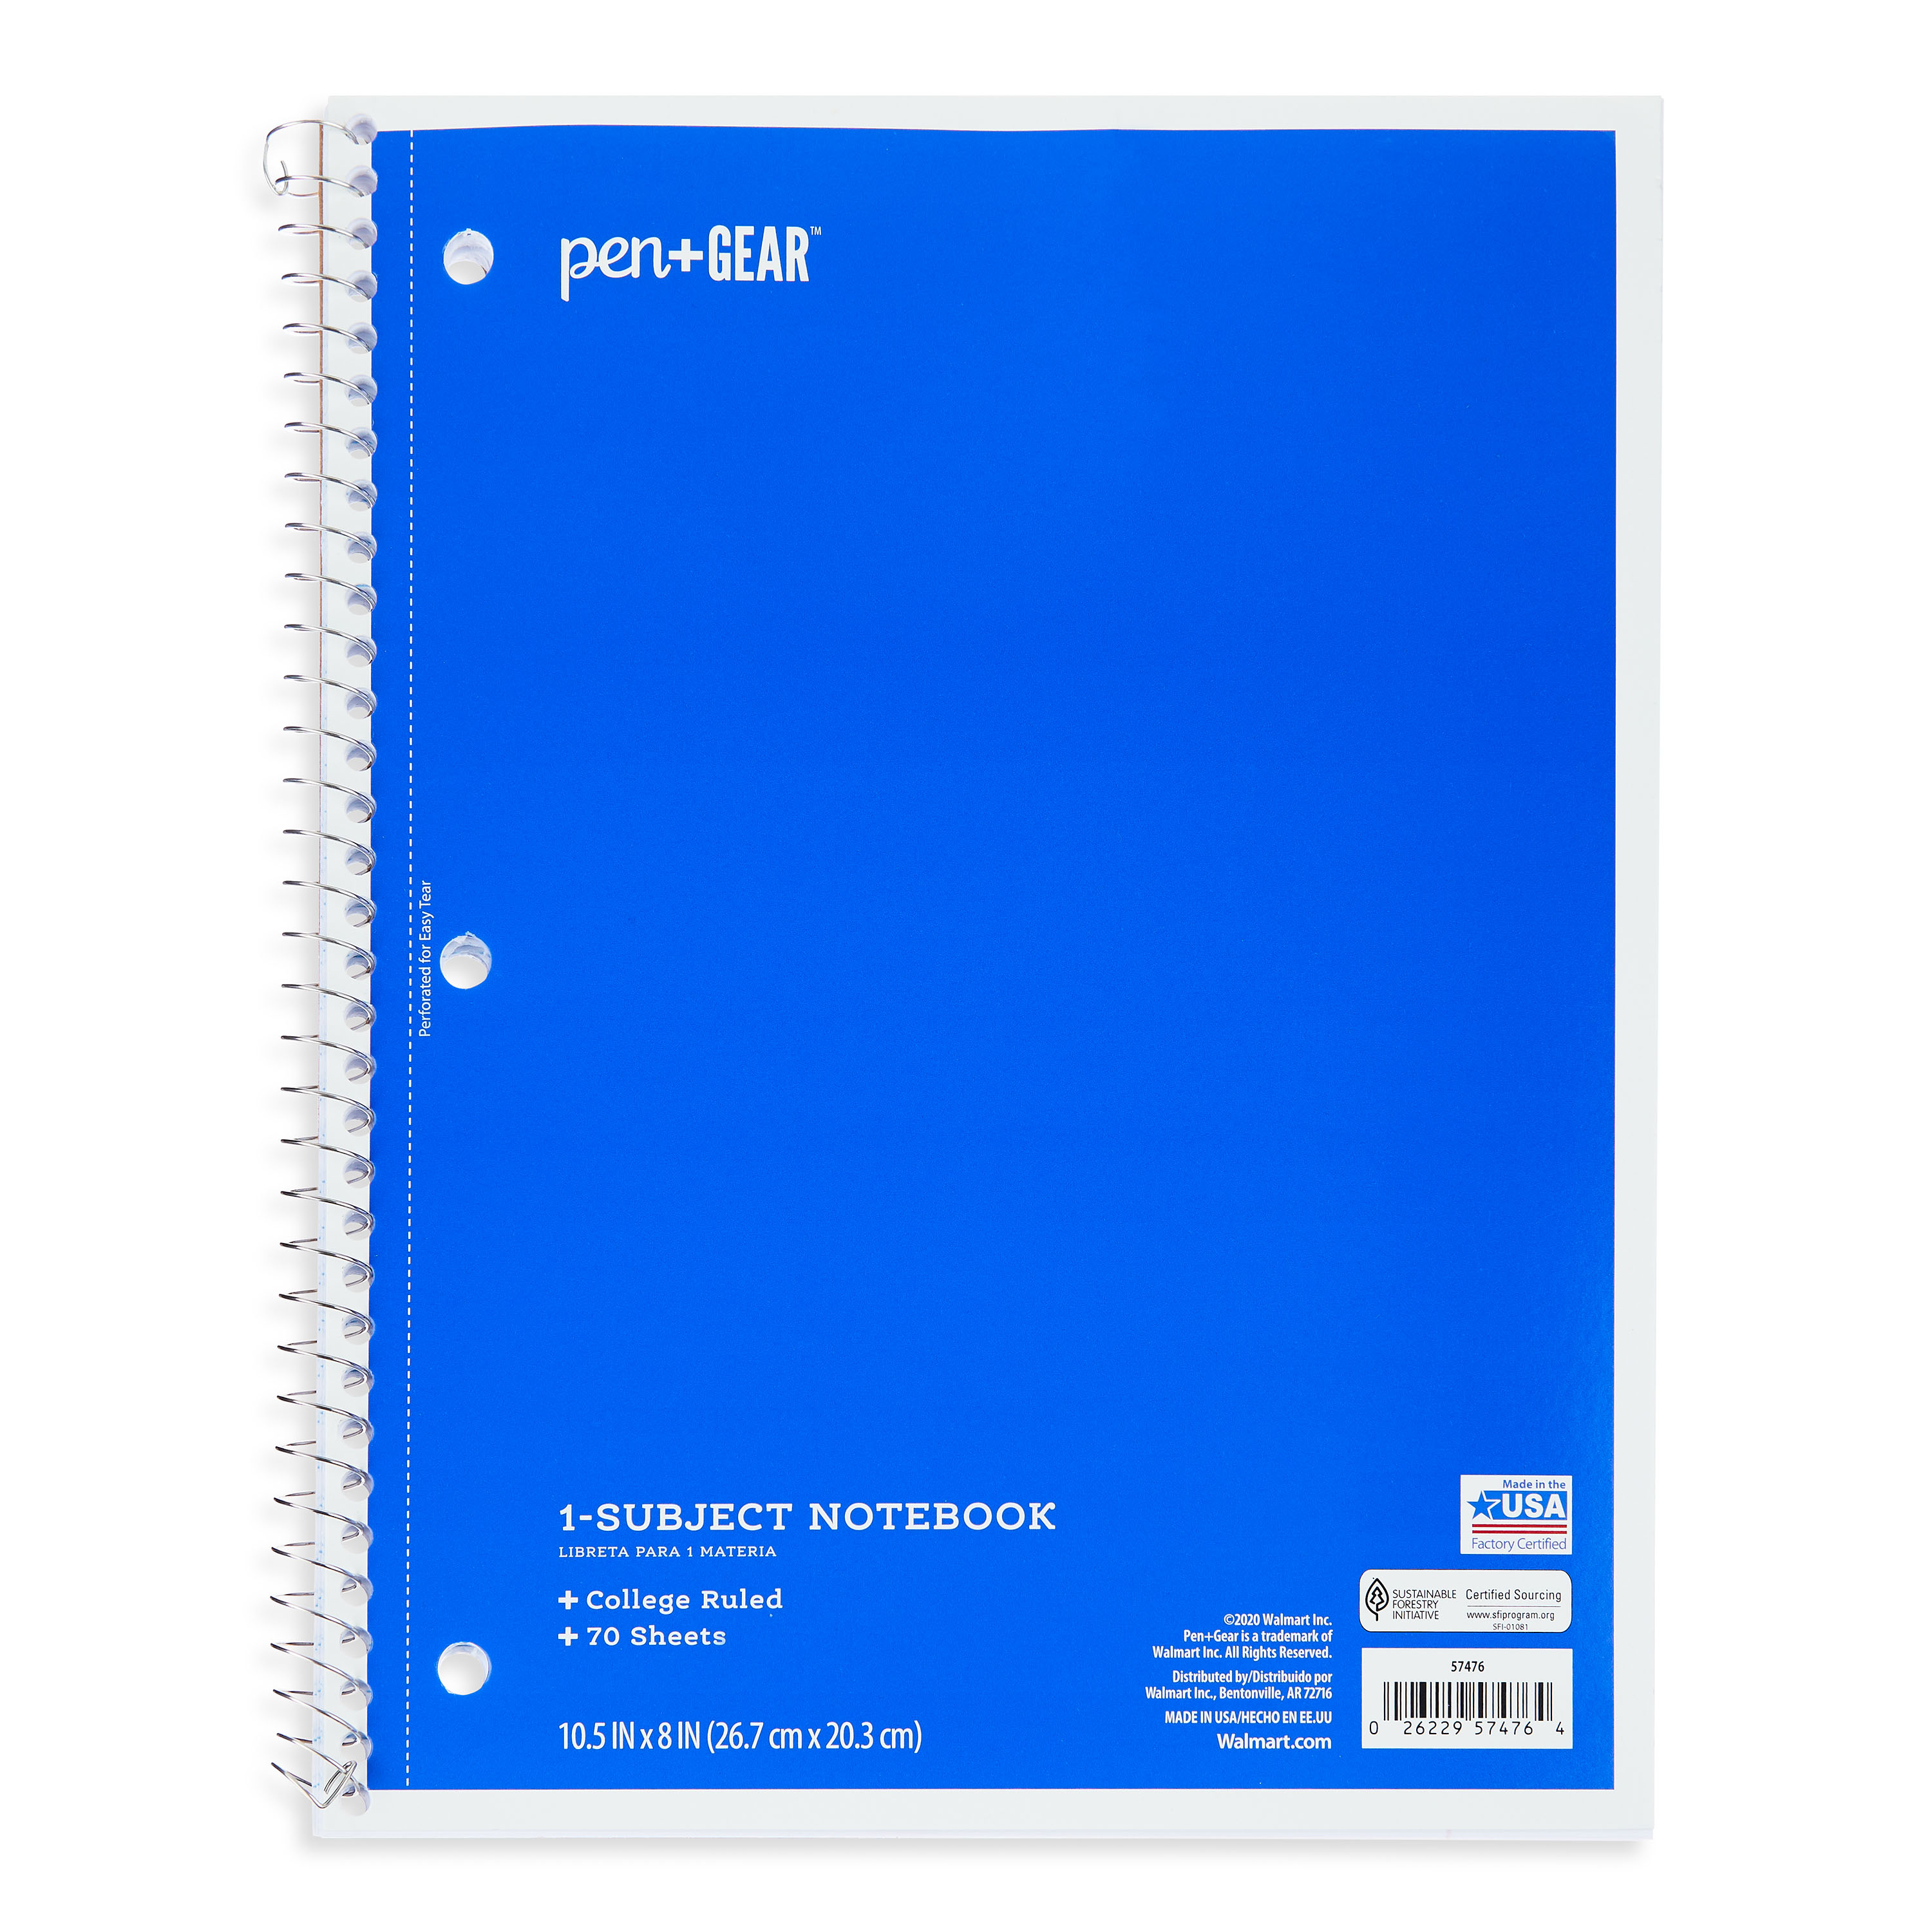 Pen + Gear 1-Subject Notebook, College Ruled, Blue, 70 Sheets - image 1 of 2